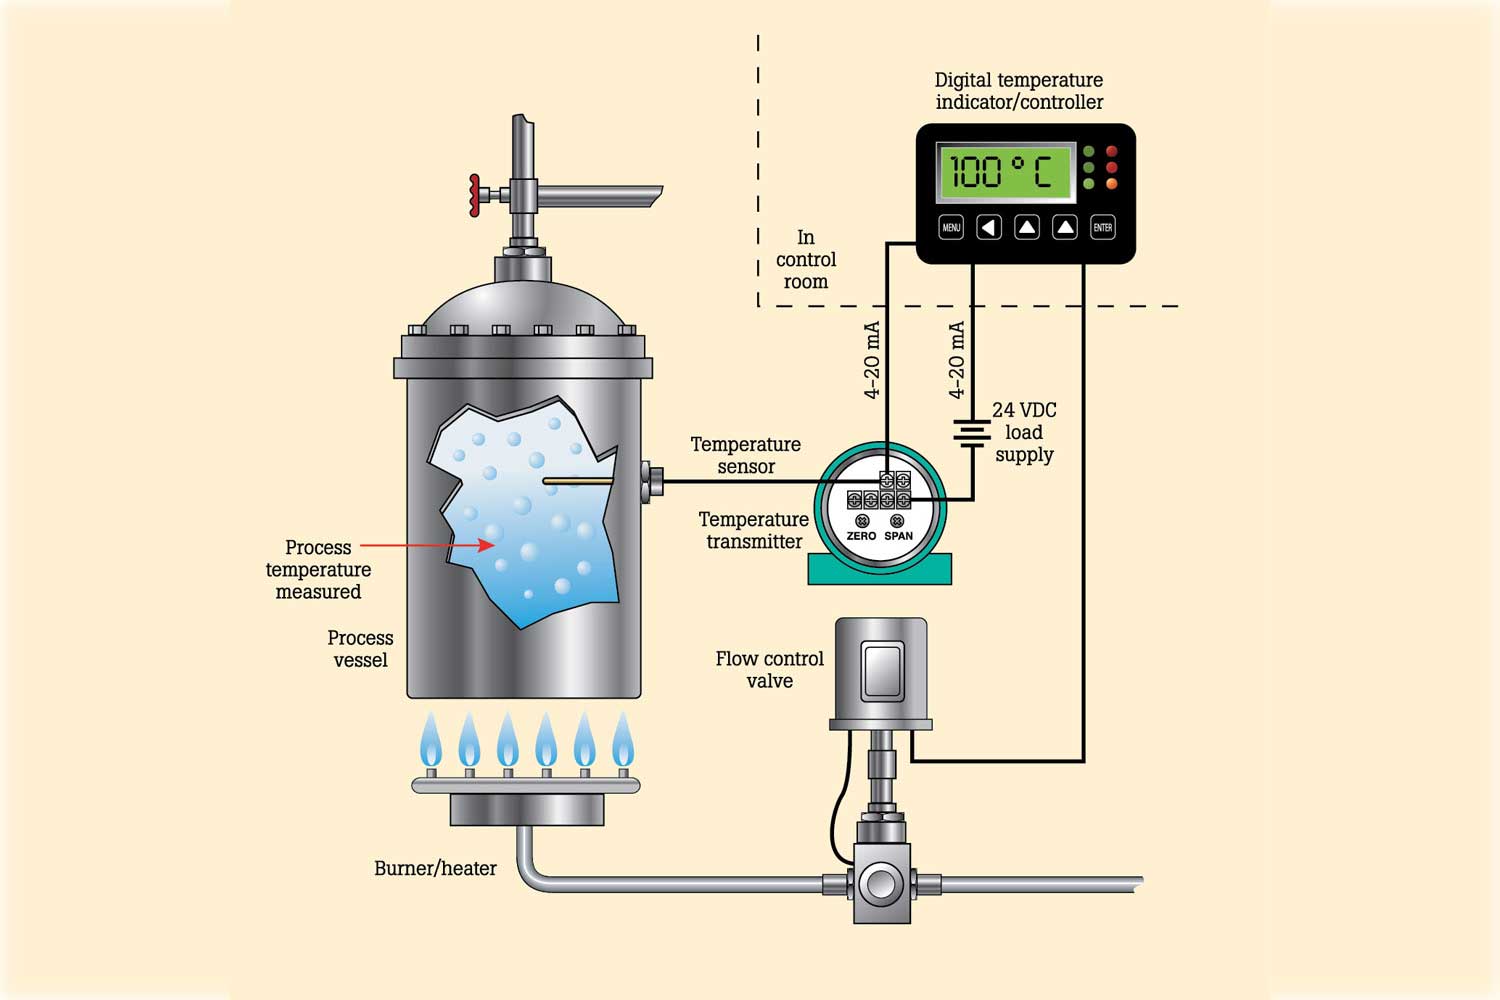 Diagram of a Common Temperature Loop with Boiler, Probe, Transmitter, Controller, and Valve